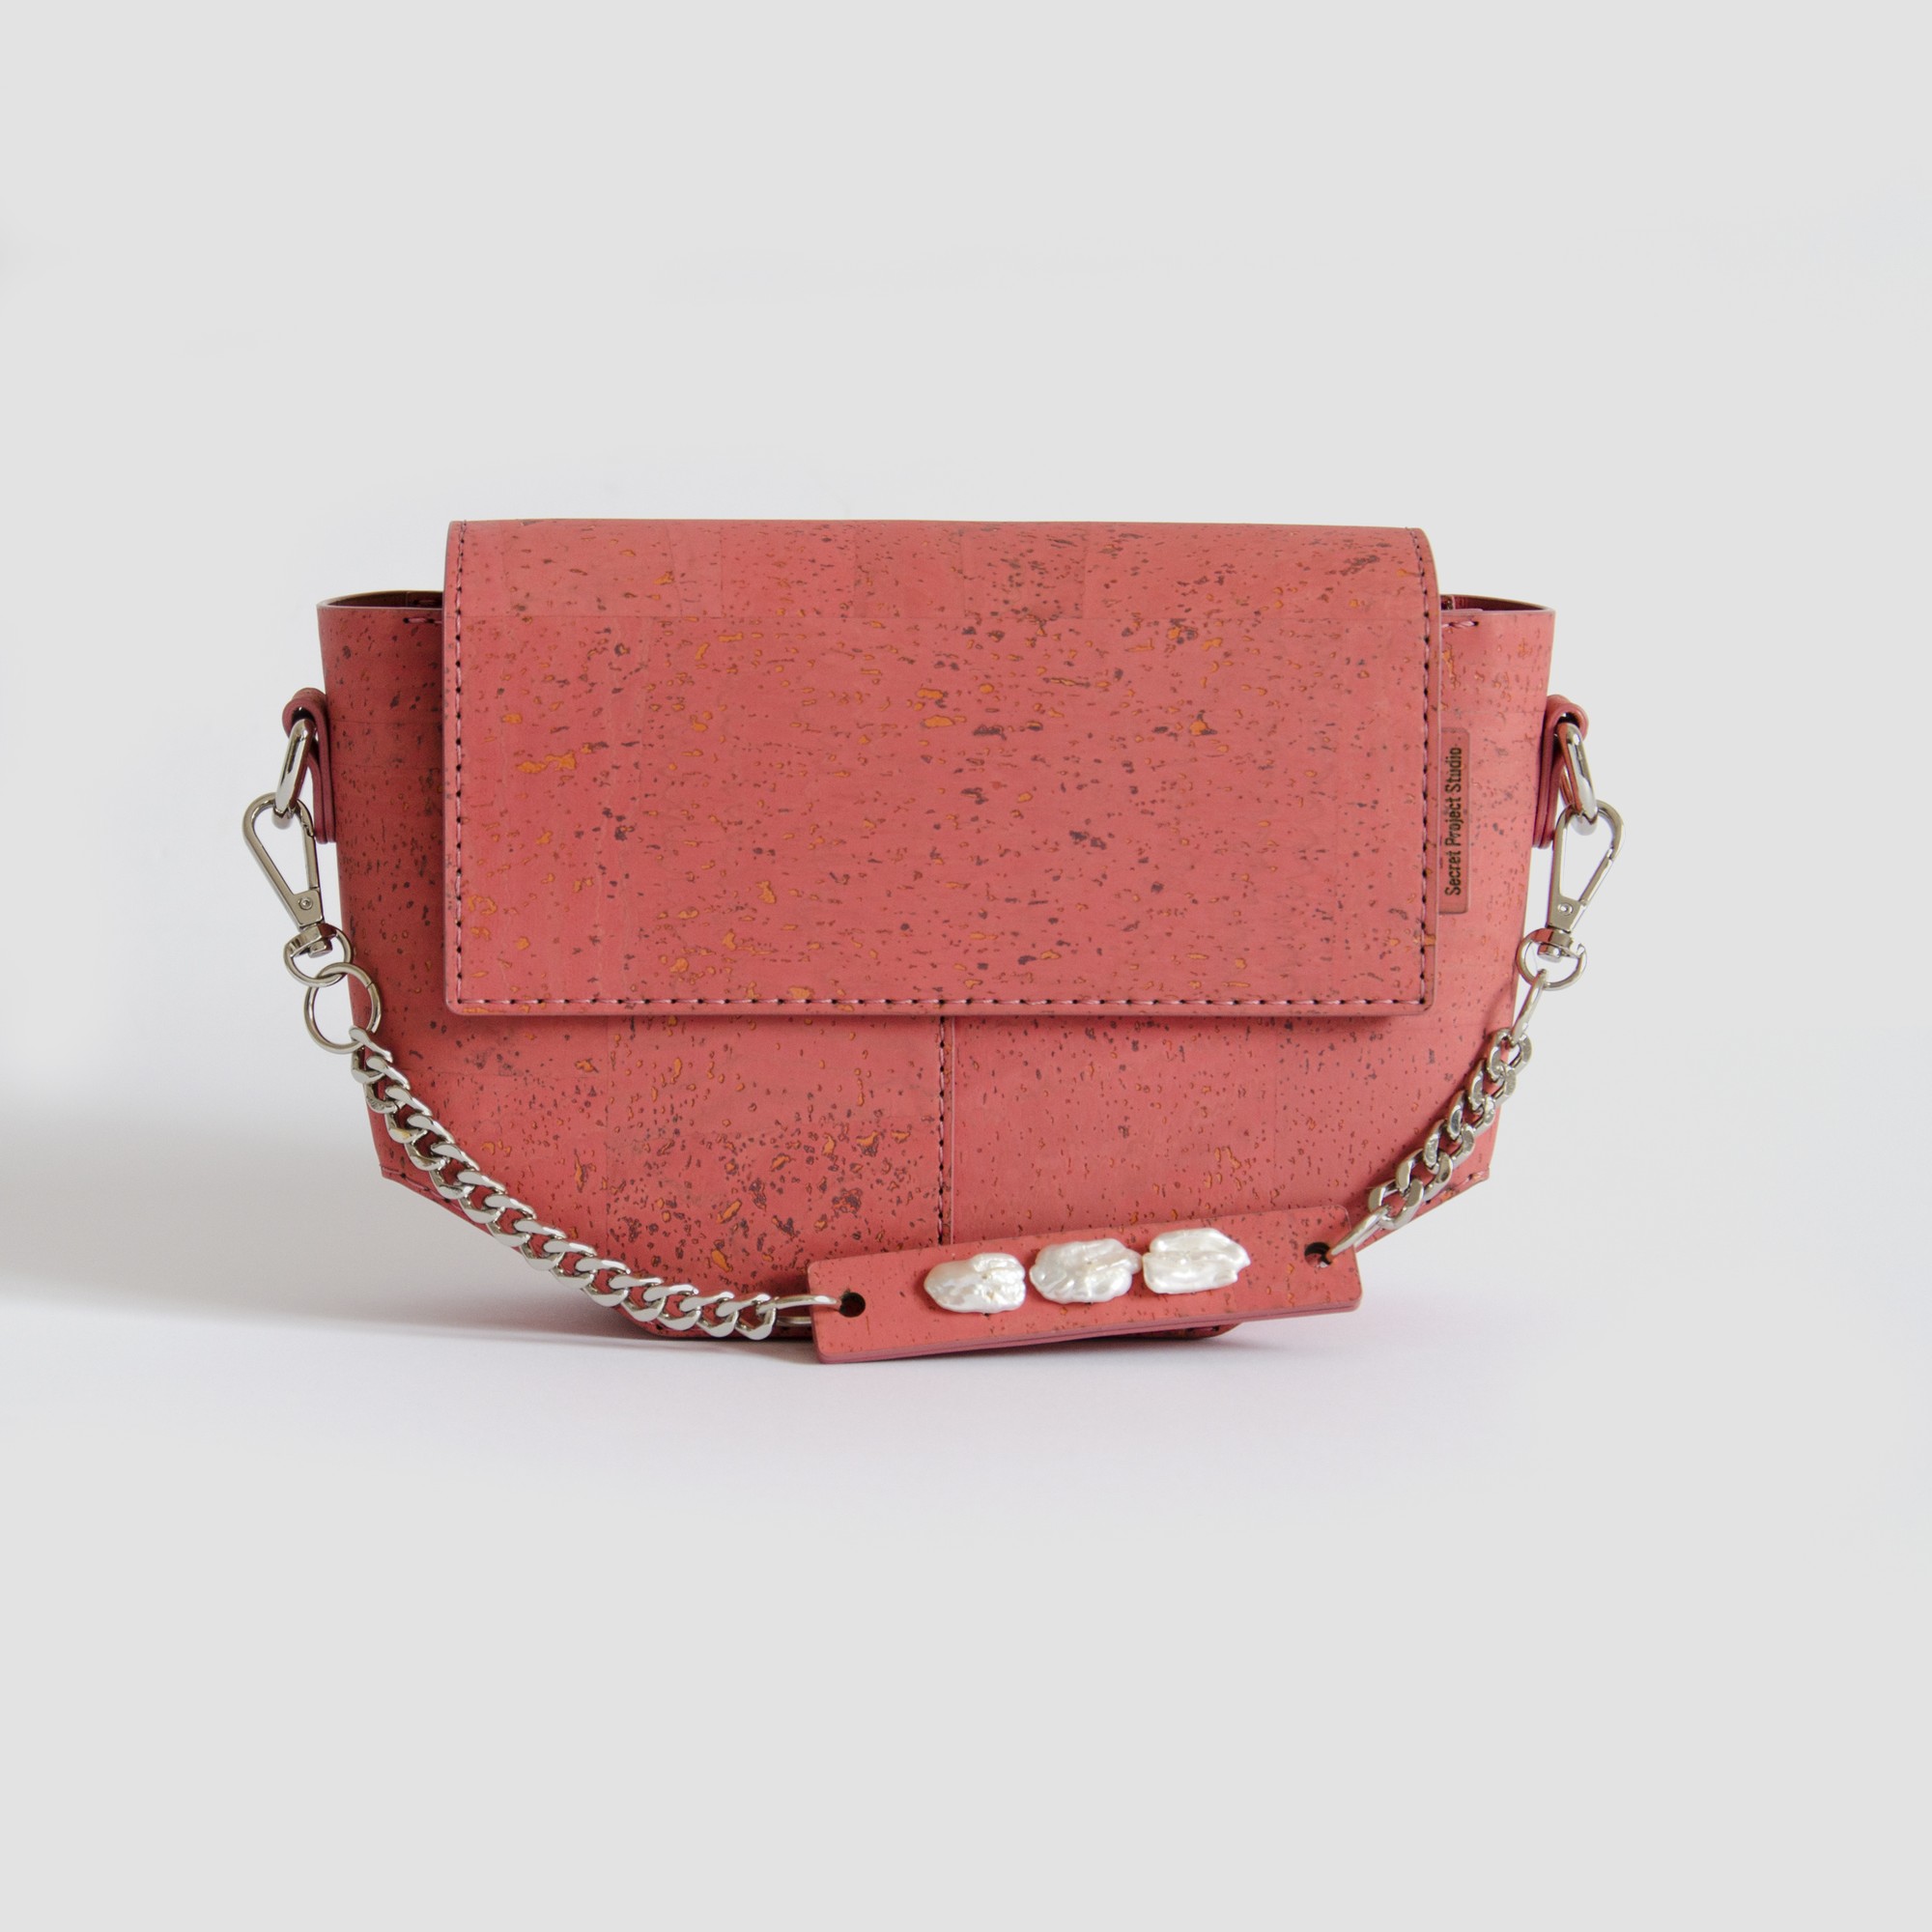 Natural Cork Leather Crossbody Bag Pearl in Coral Color. Made in Ukraine